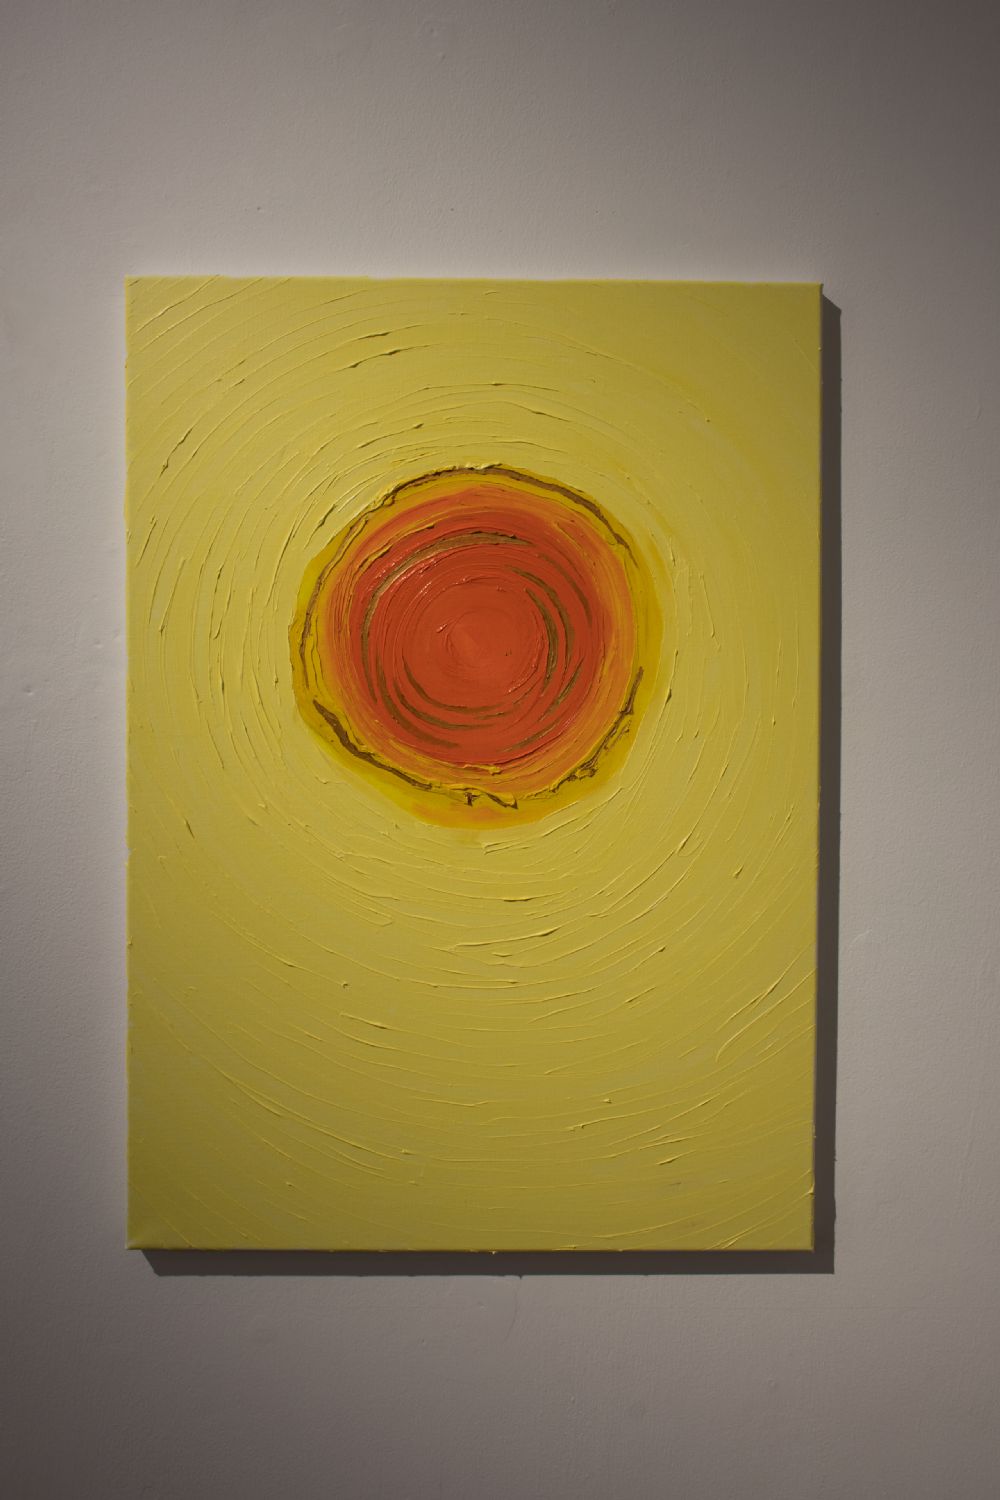 SUN, 2021 by Eve Woods  at deVeres Auctions